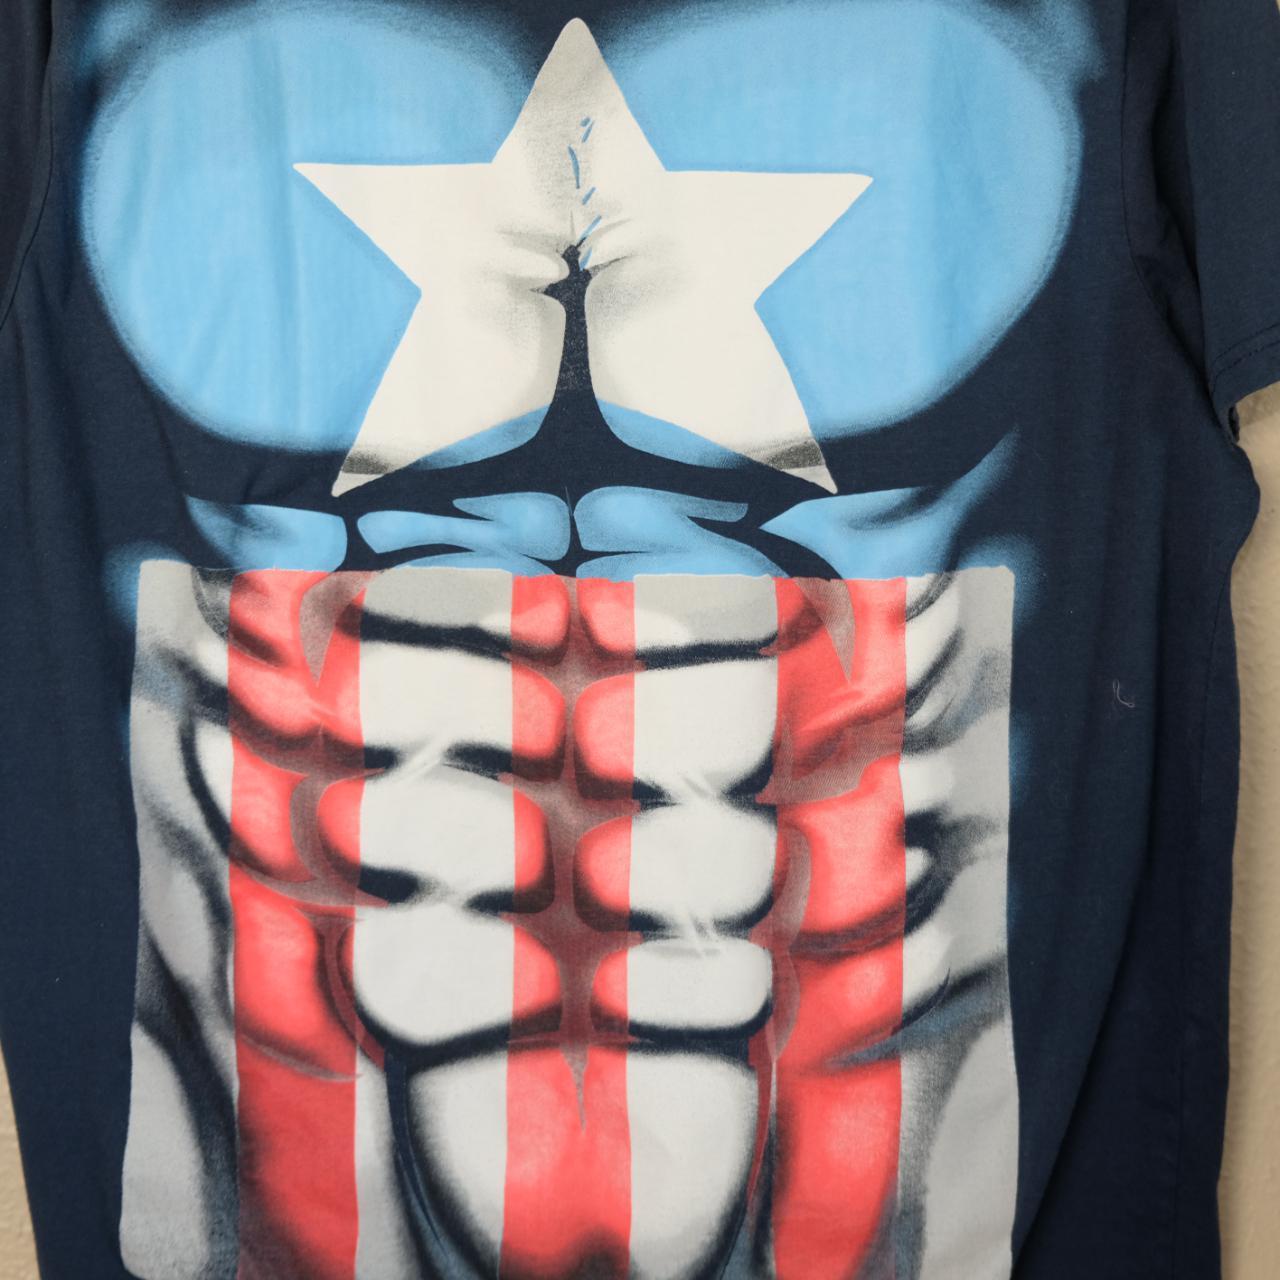 Product Image 3 - Pre-Loved Marvel Captain America Tee

Tag